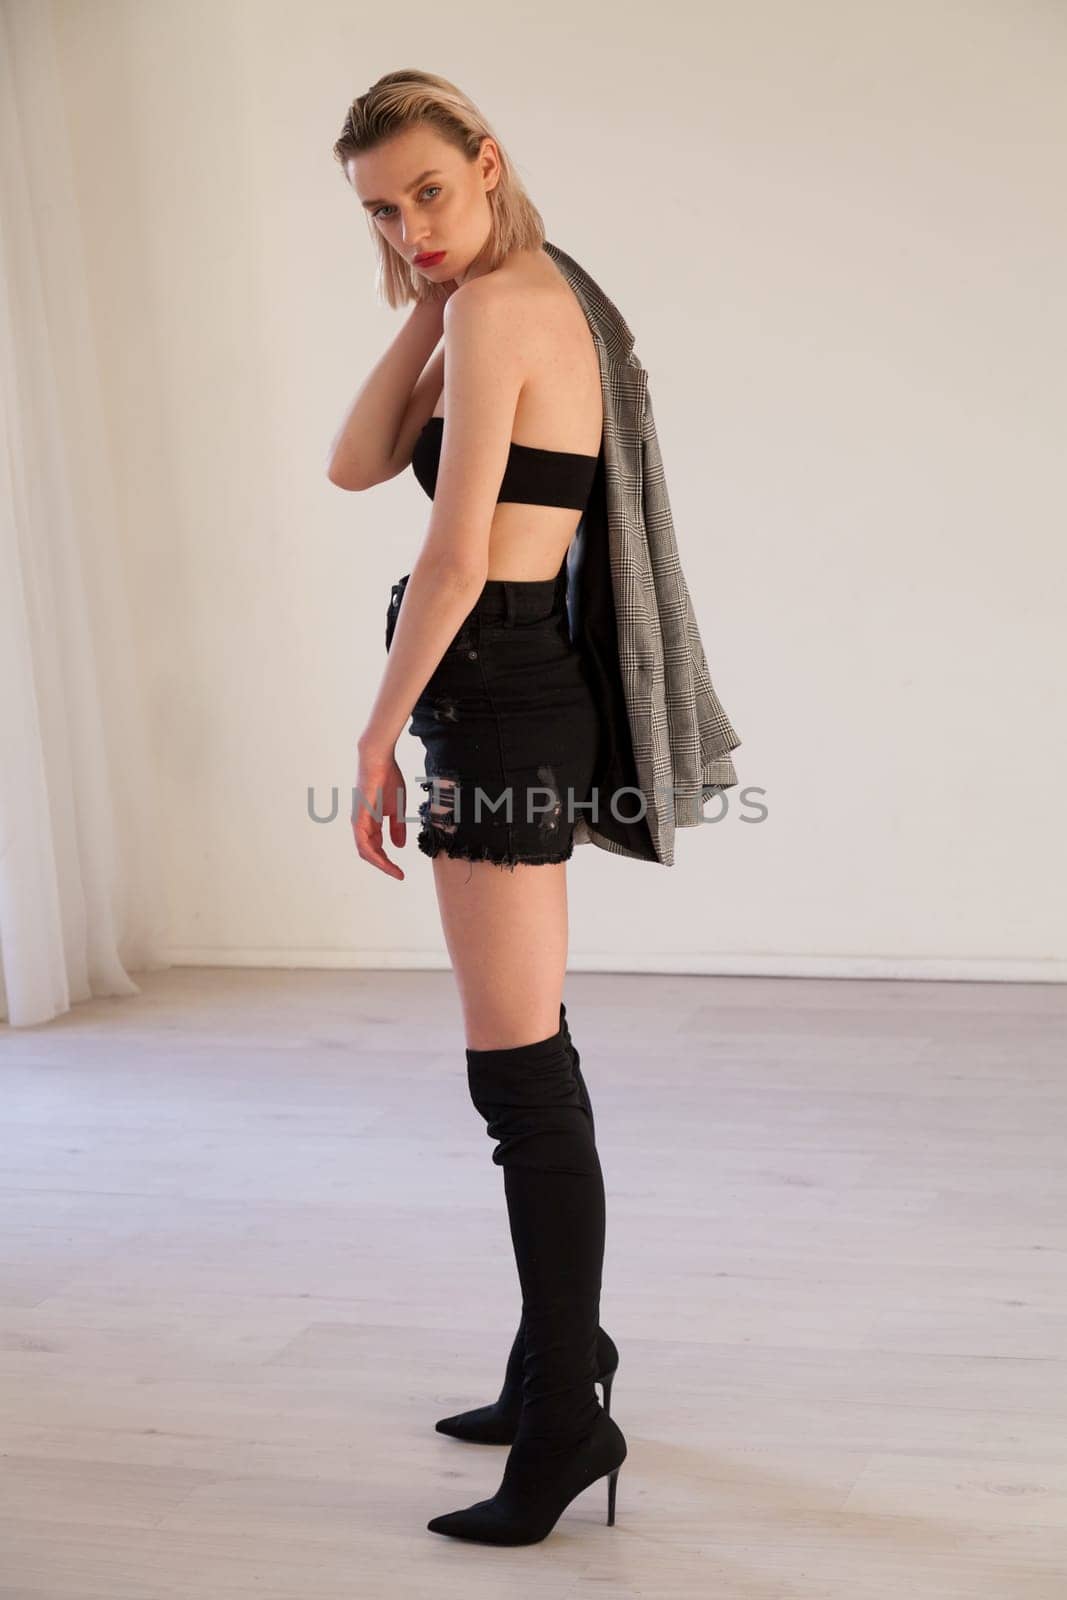 Porter beautiful blonde woman in clothes and boots